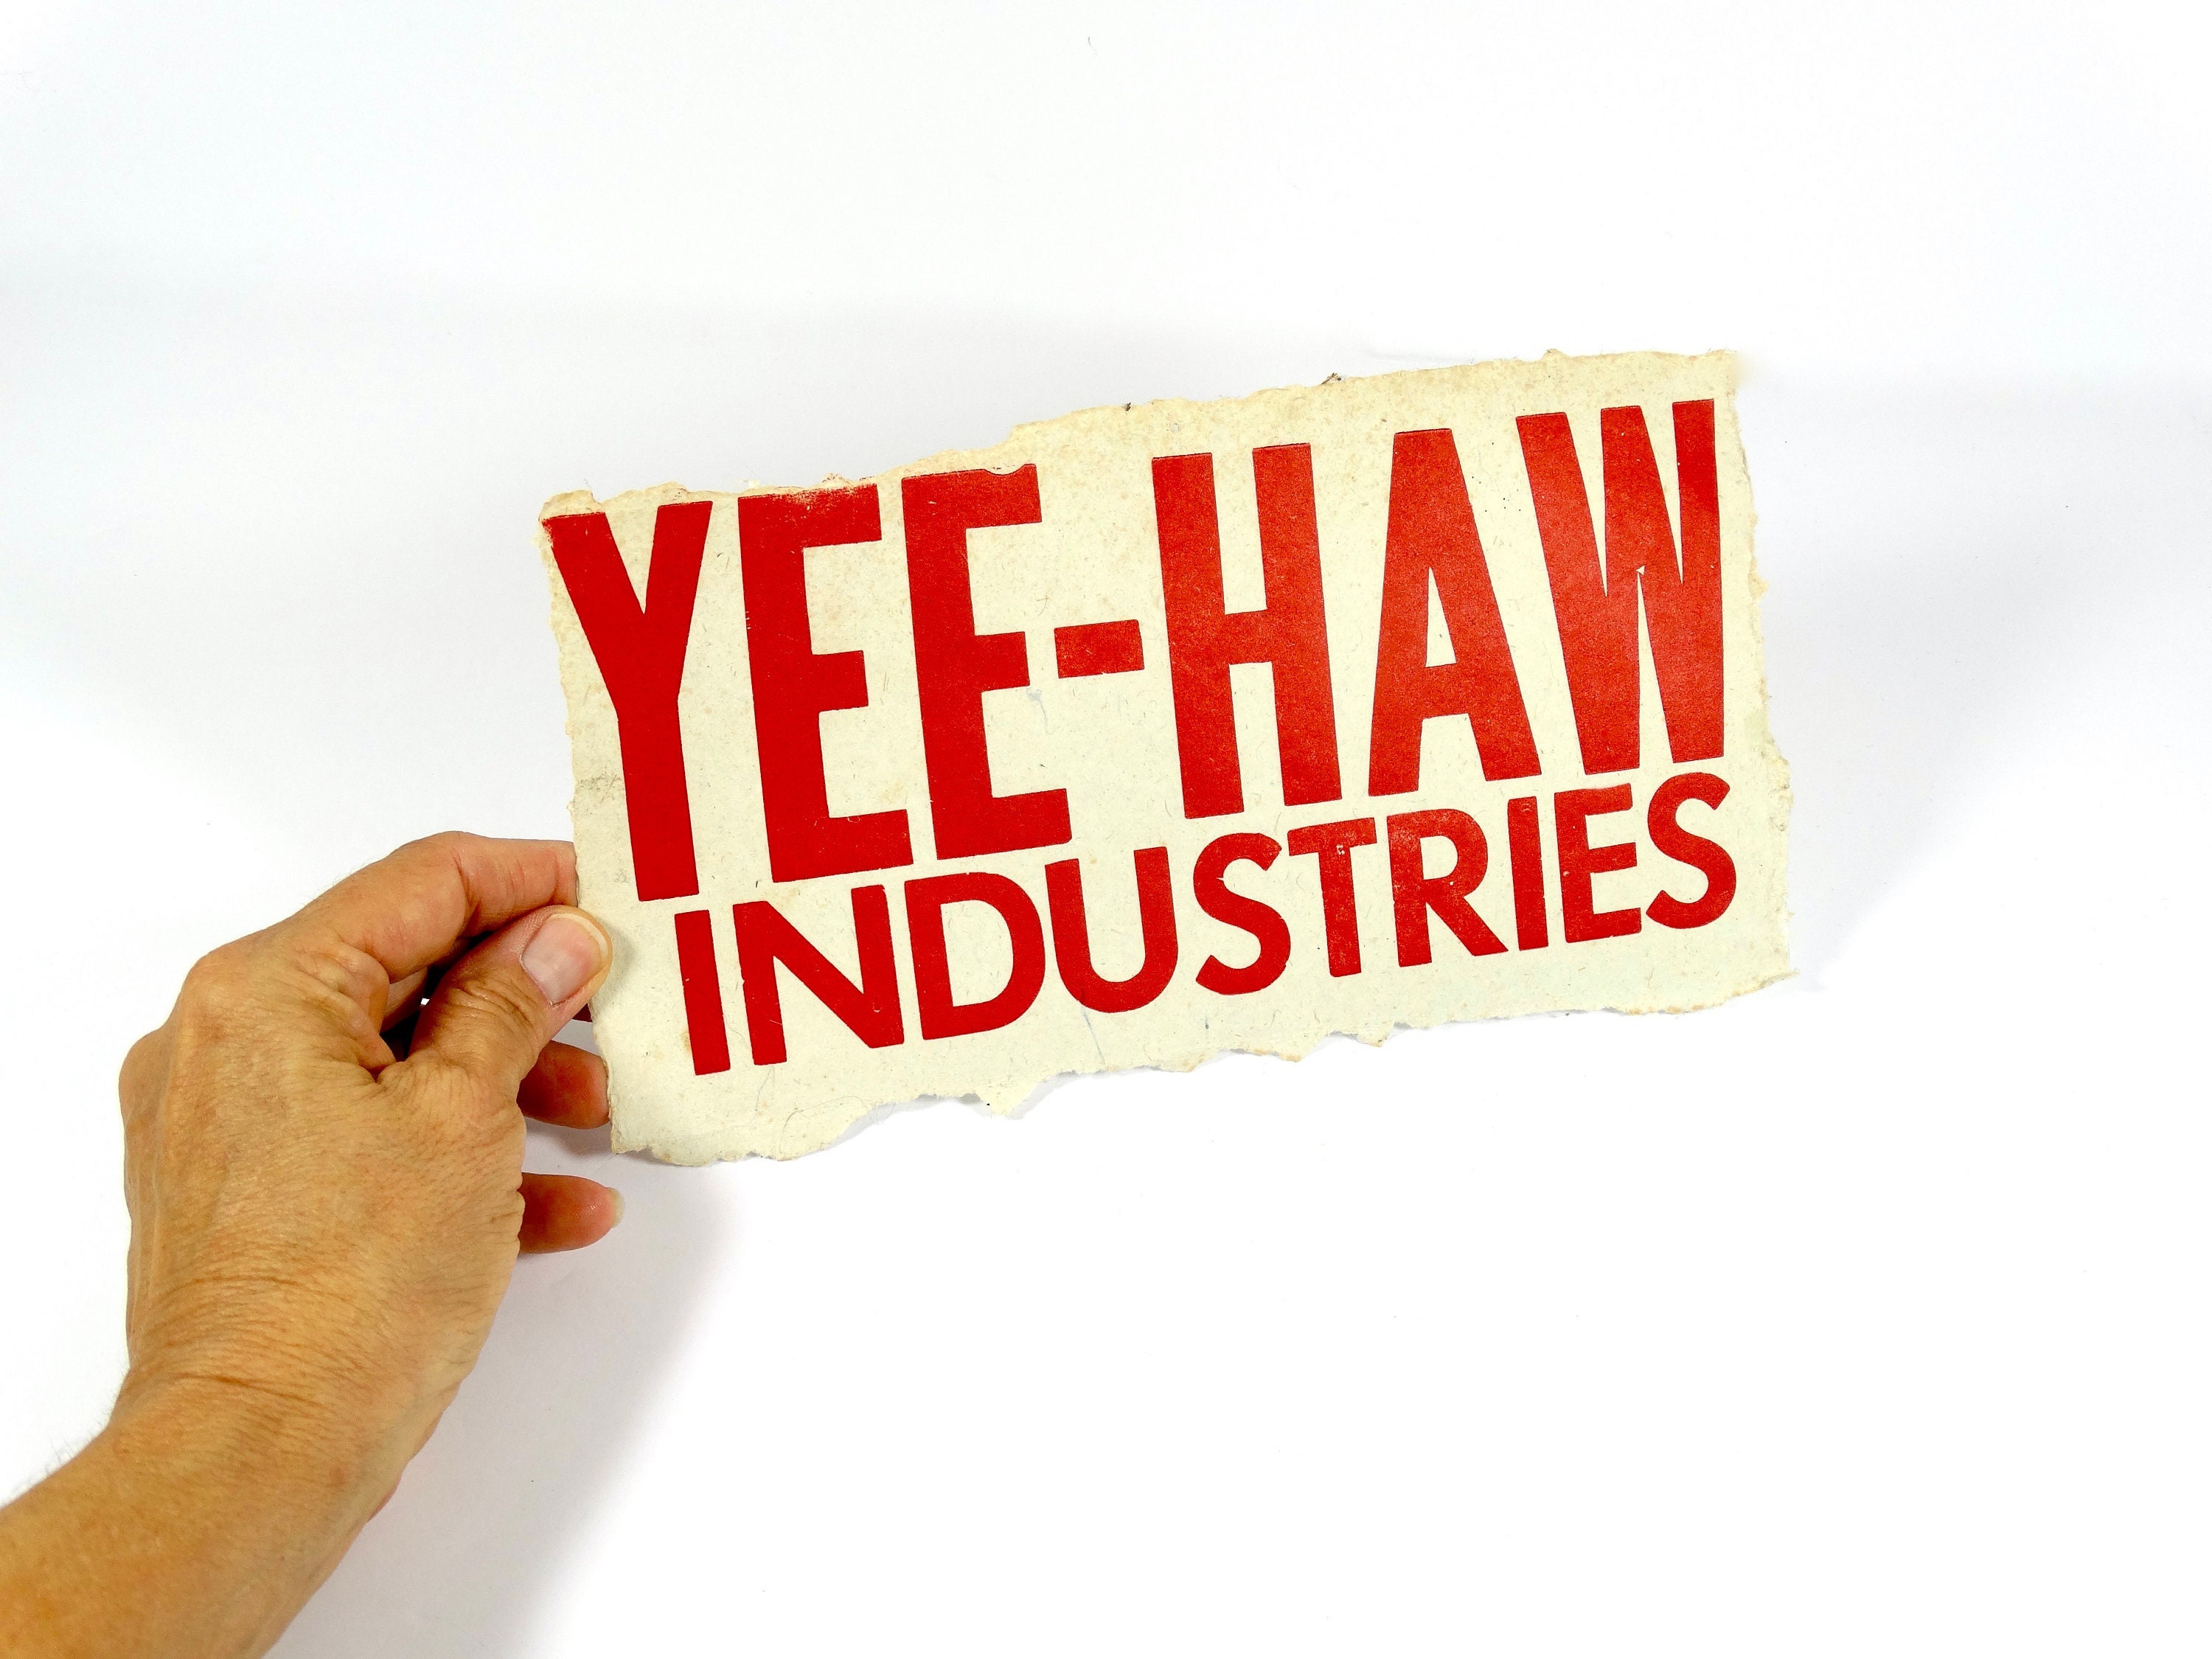 Yee Haw Hanging Canvas Banner